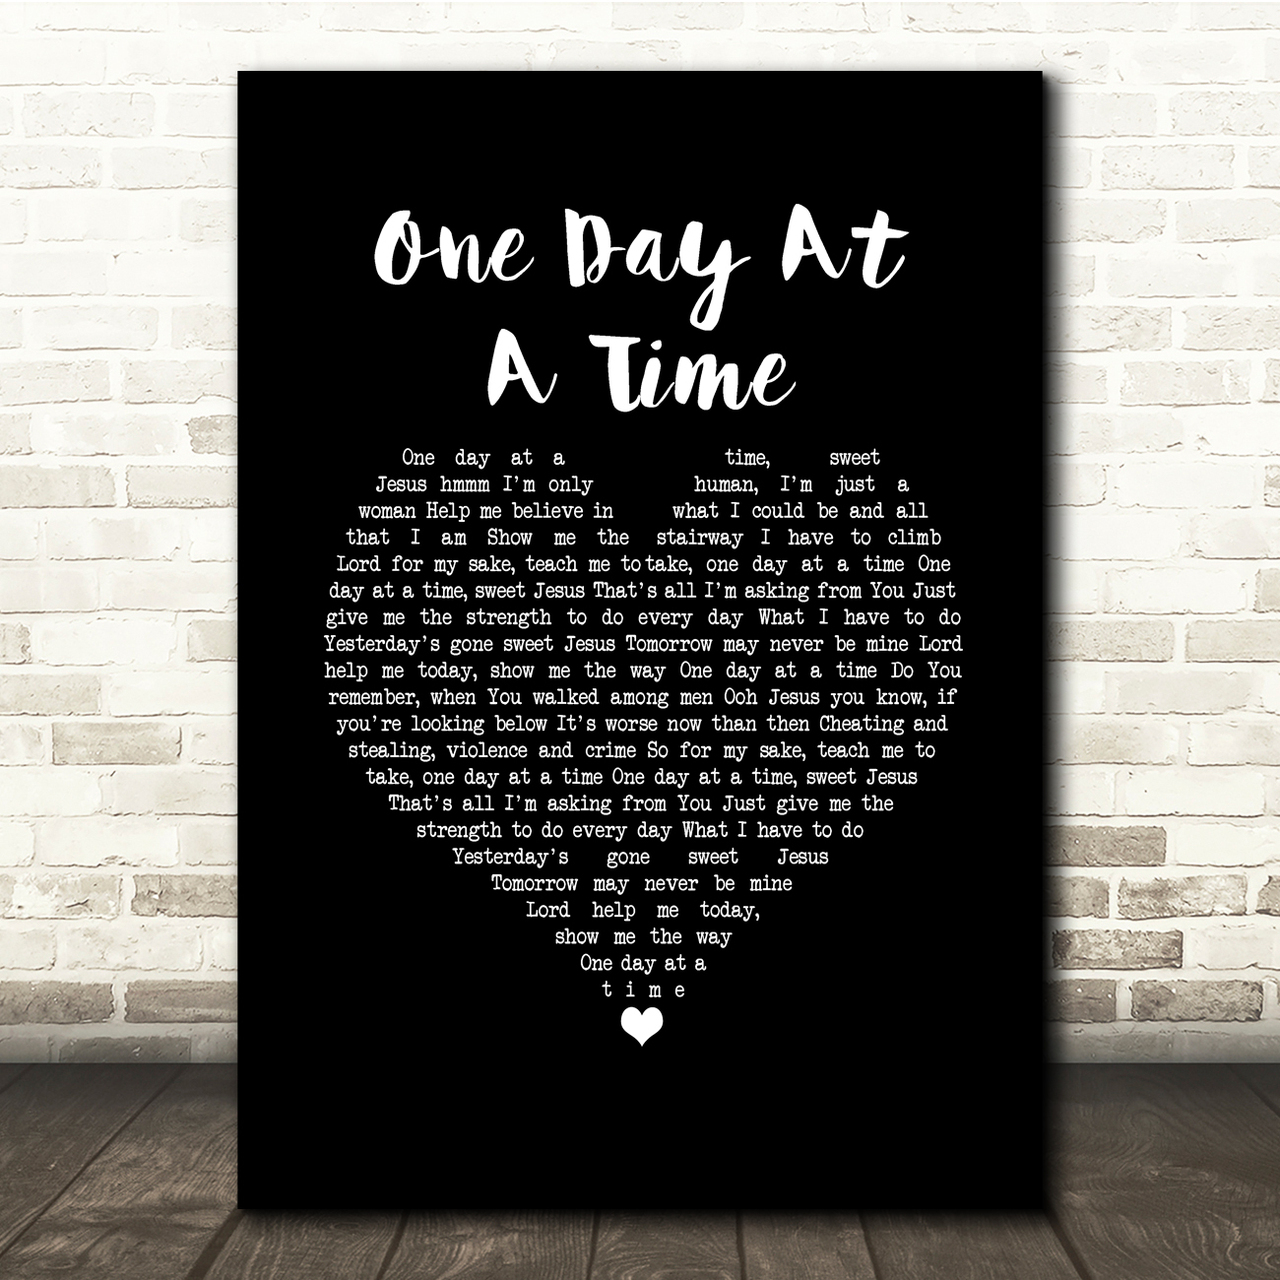 Lena Martell One Day At A Time Black Heart Song Lyric Quote Music Poster Print